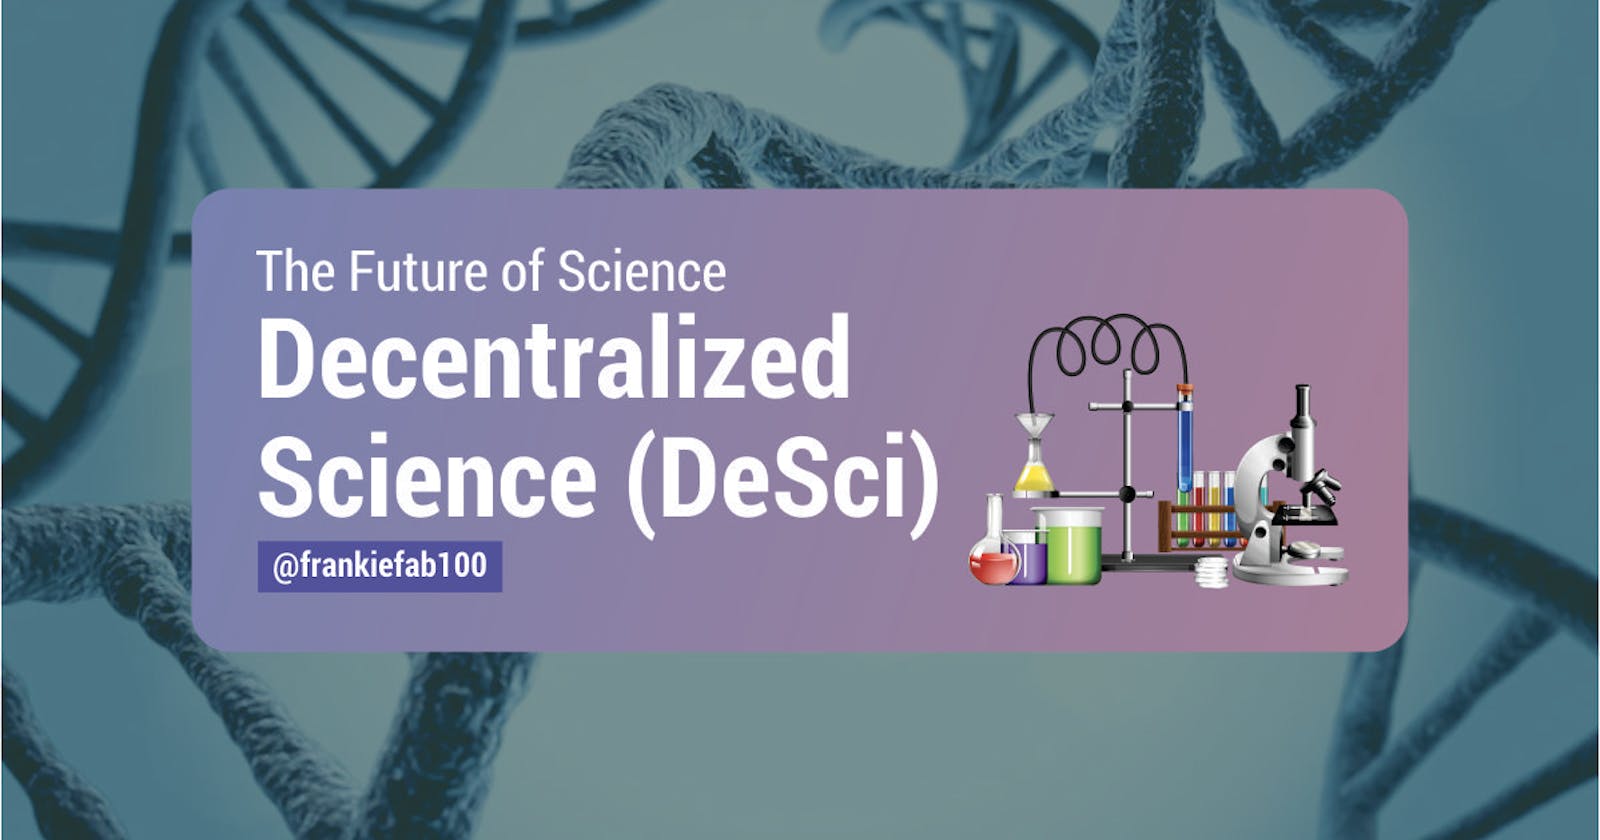 The Future of Science: What You Need to Know About Decentralized Science (DeSci)